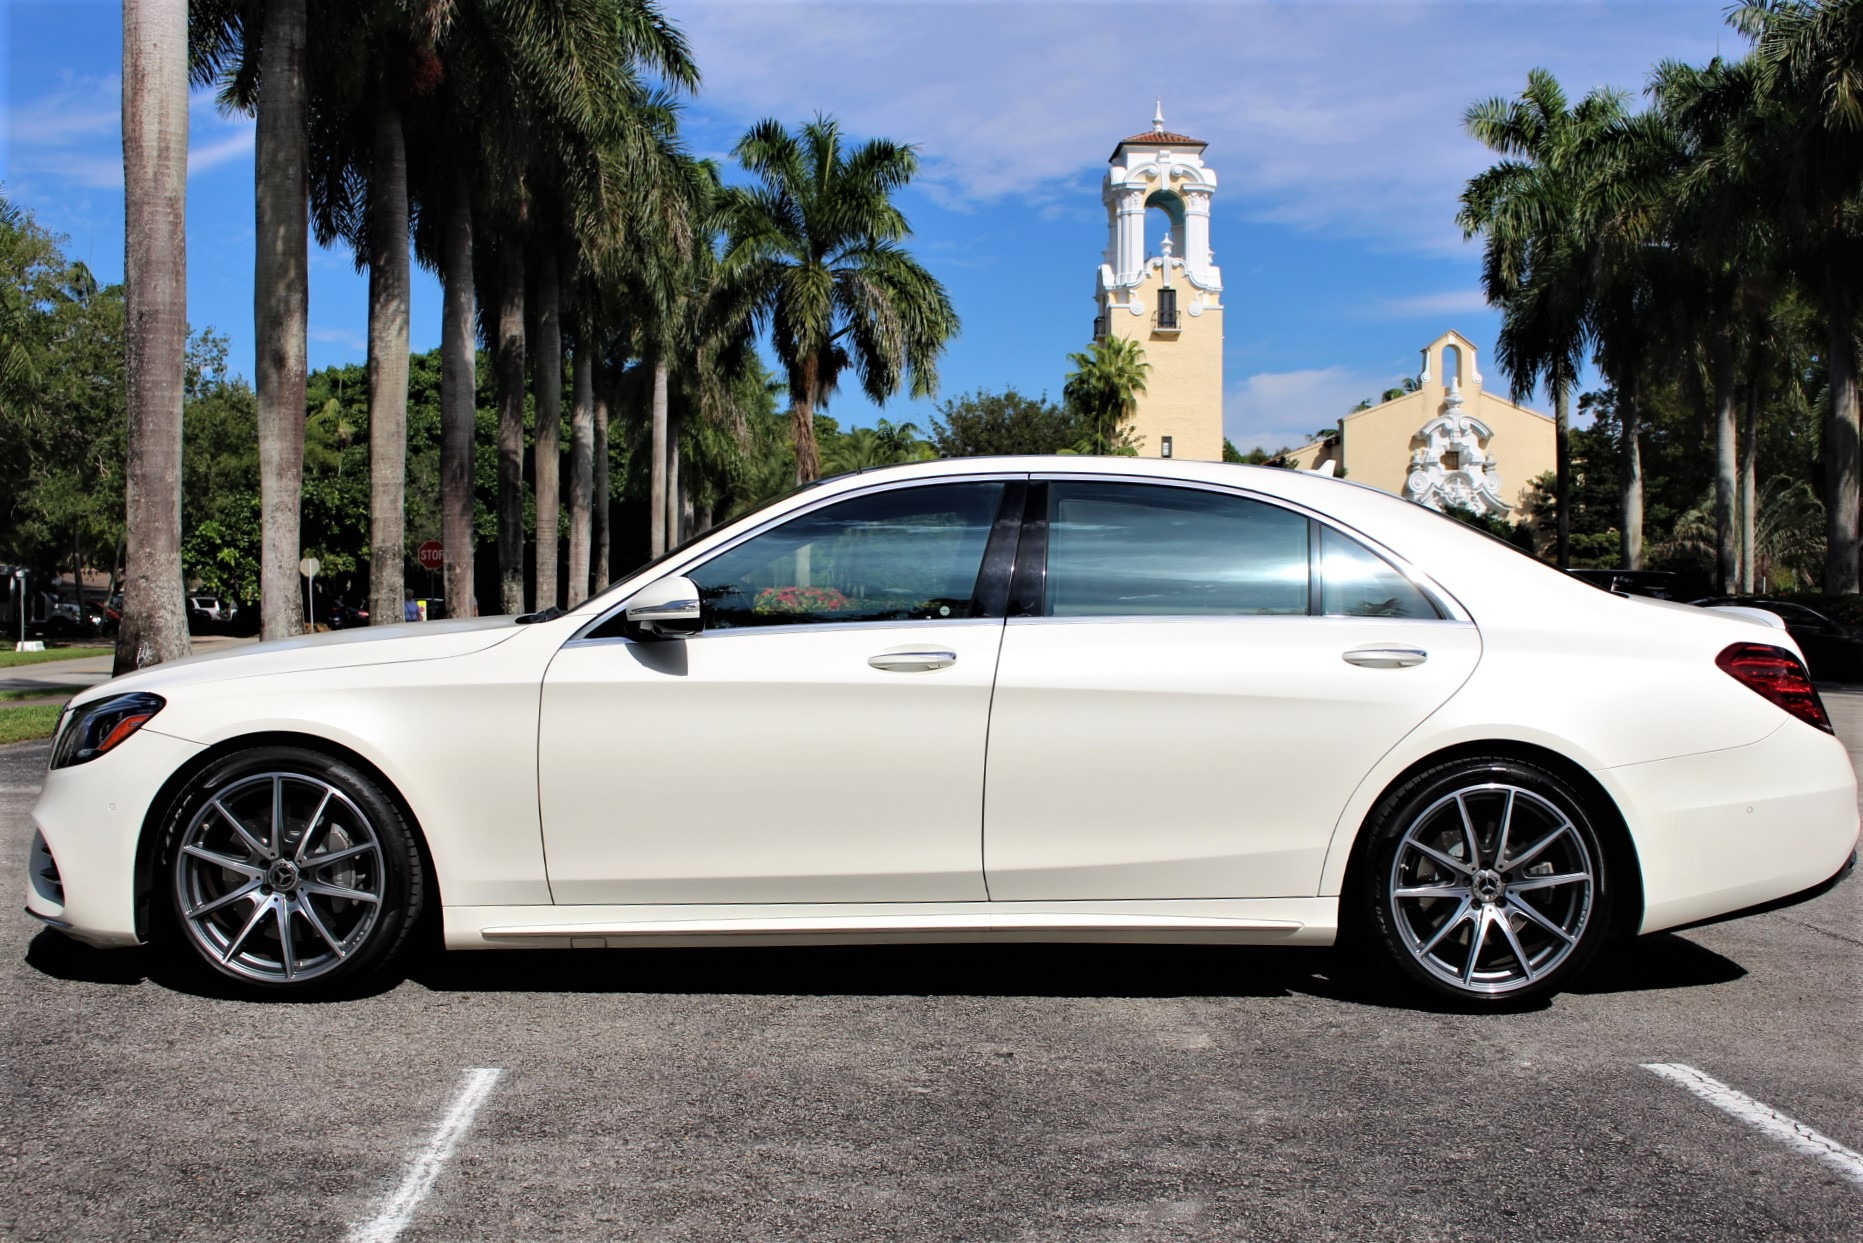 Used 2019 Mercedes-Benz S-Class S 560 for sale Sold at The Gables Sports Cars in Miami FL 33146 3